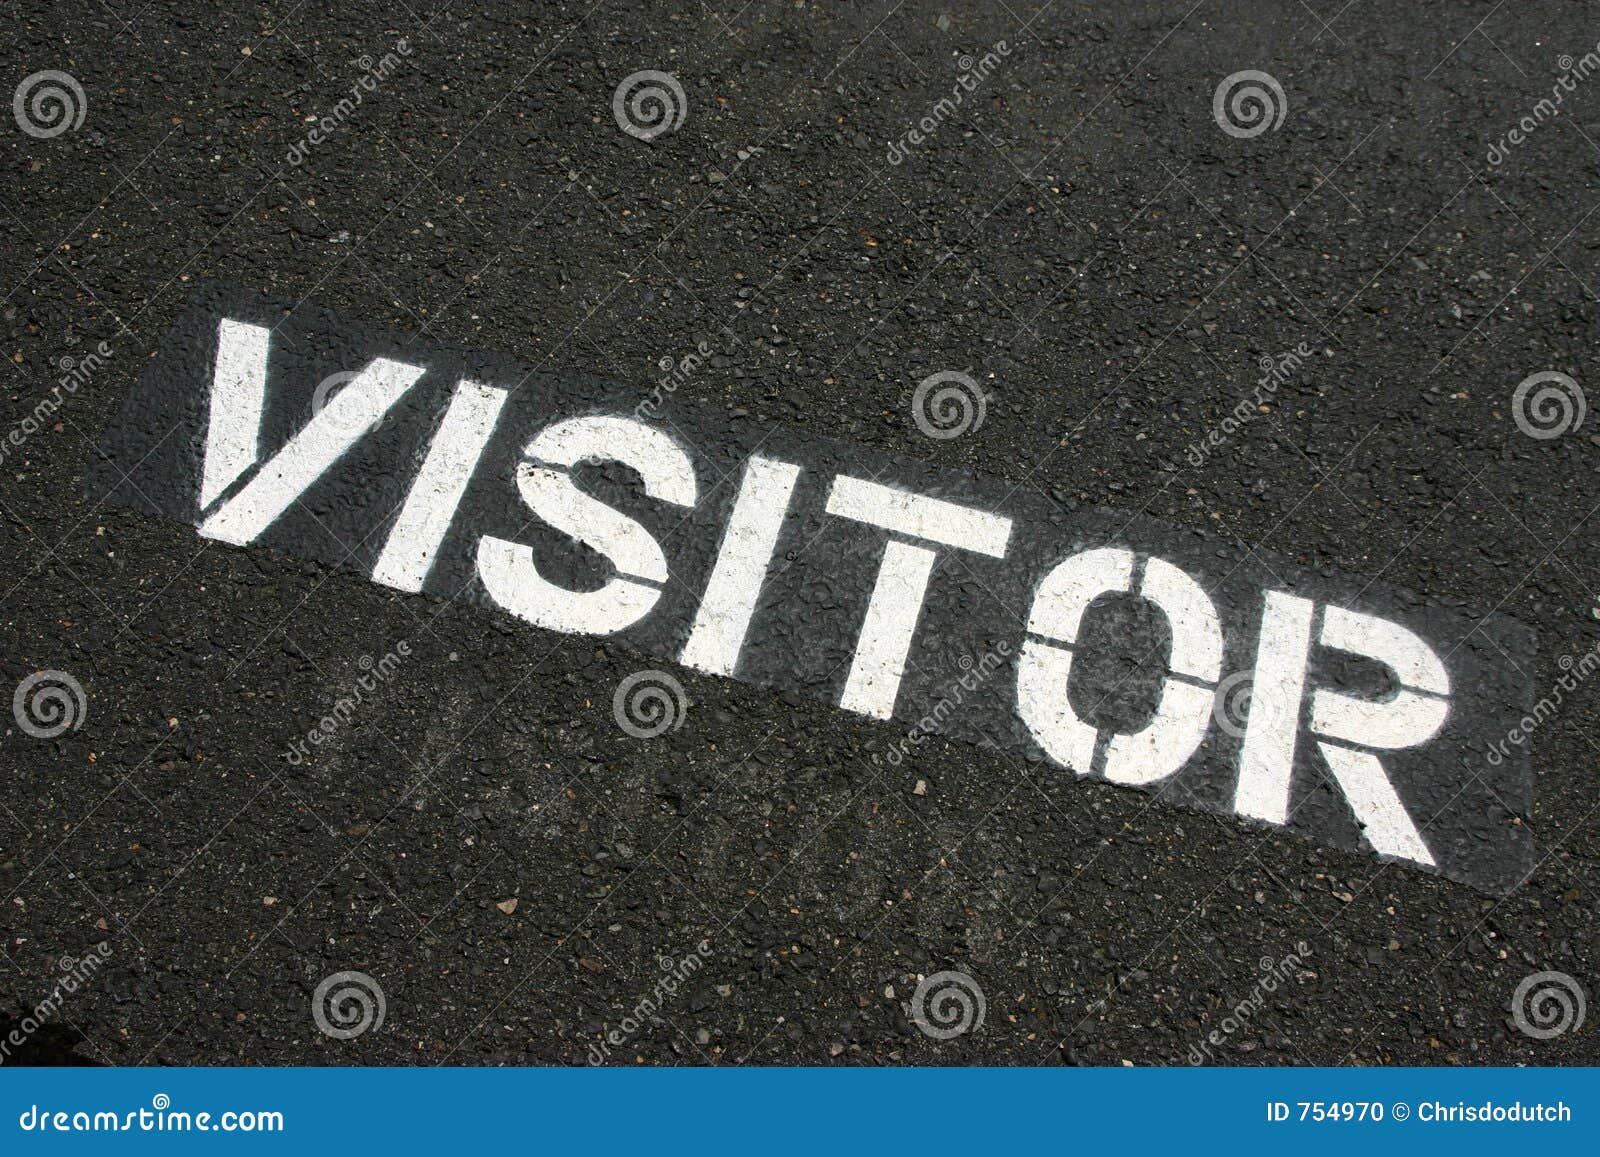 visitor sign on pavement